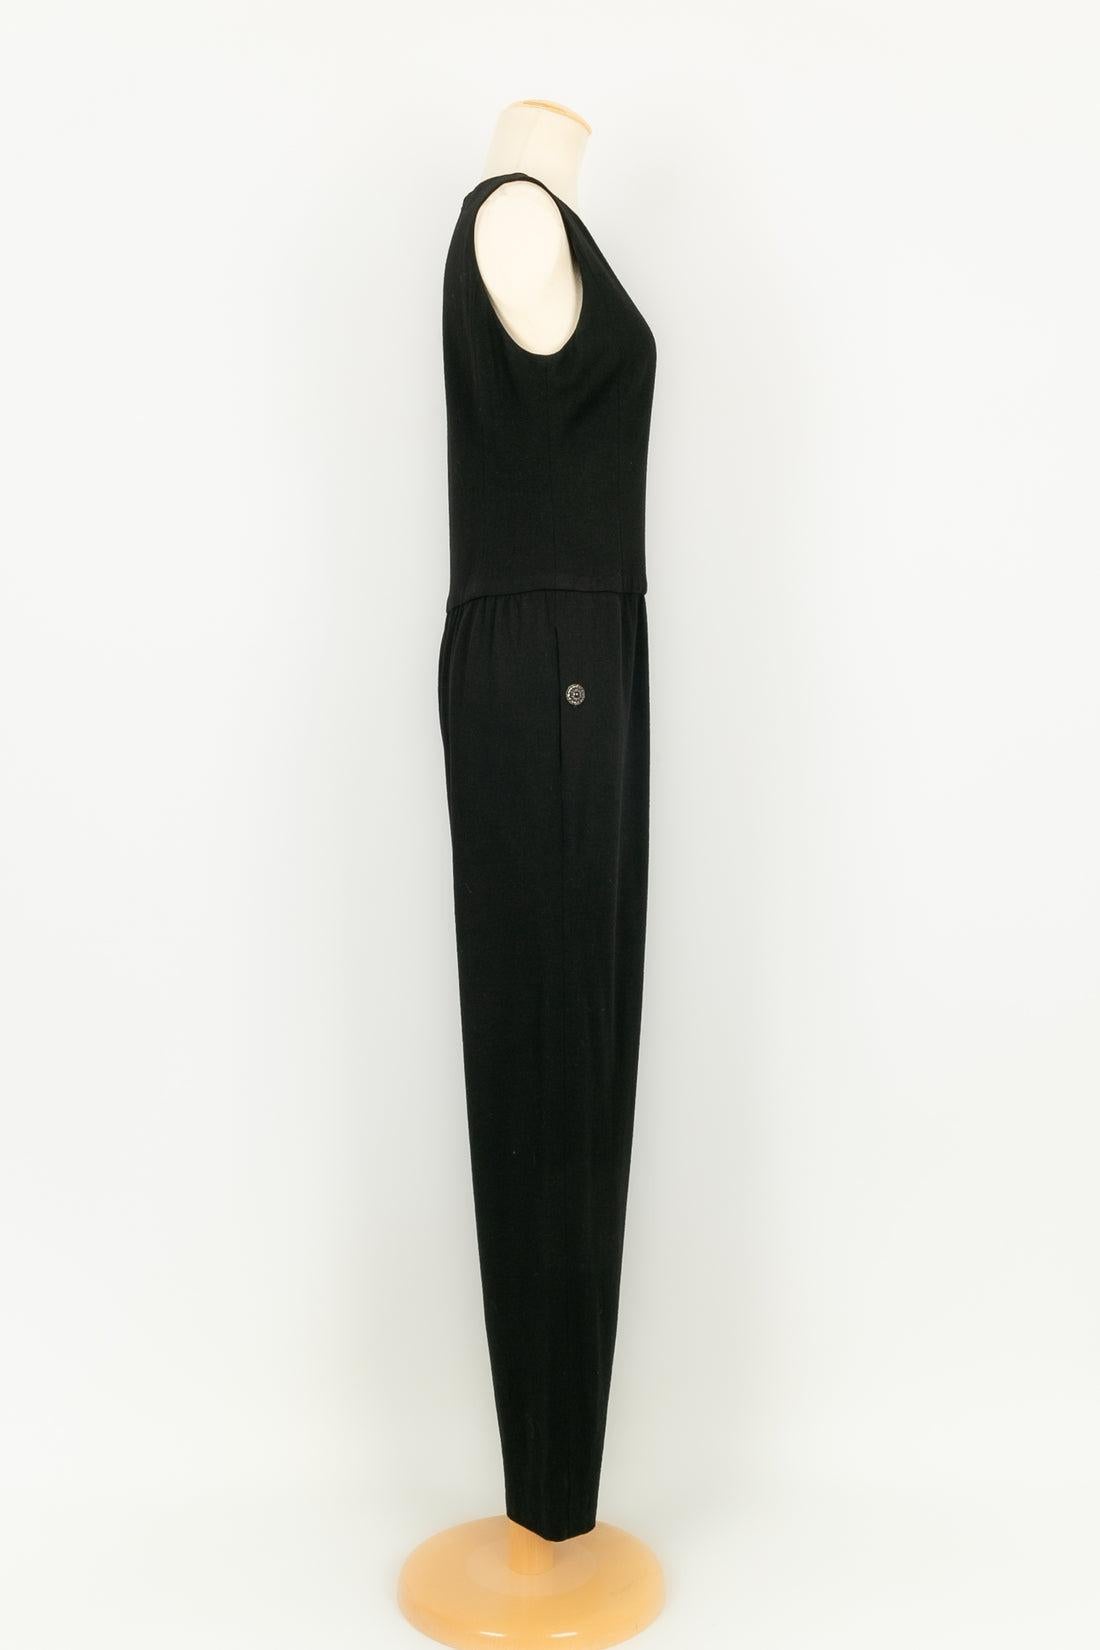 Chanel - Black woolen jumpsuit with silk lining. No size indicated and no composition label, it fits a 42FR.

Additional information:
Condition: Very good condition
Dimensions: Chest: 47 cm - Waist: 42 cm - Hips: 50 cm - Length: 140 cm

Seller